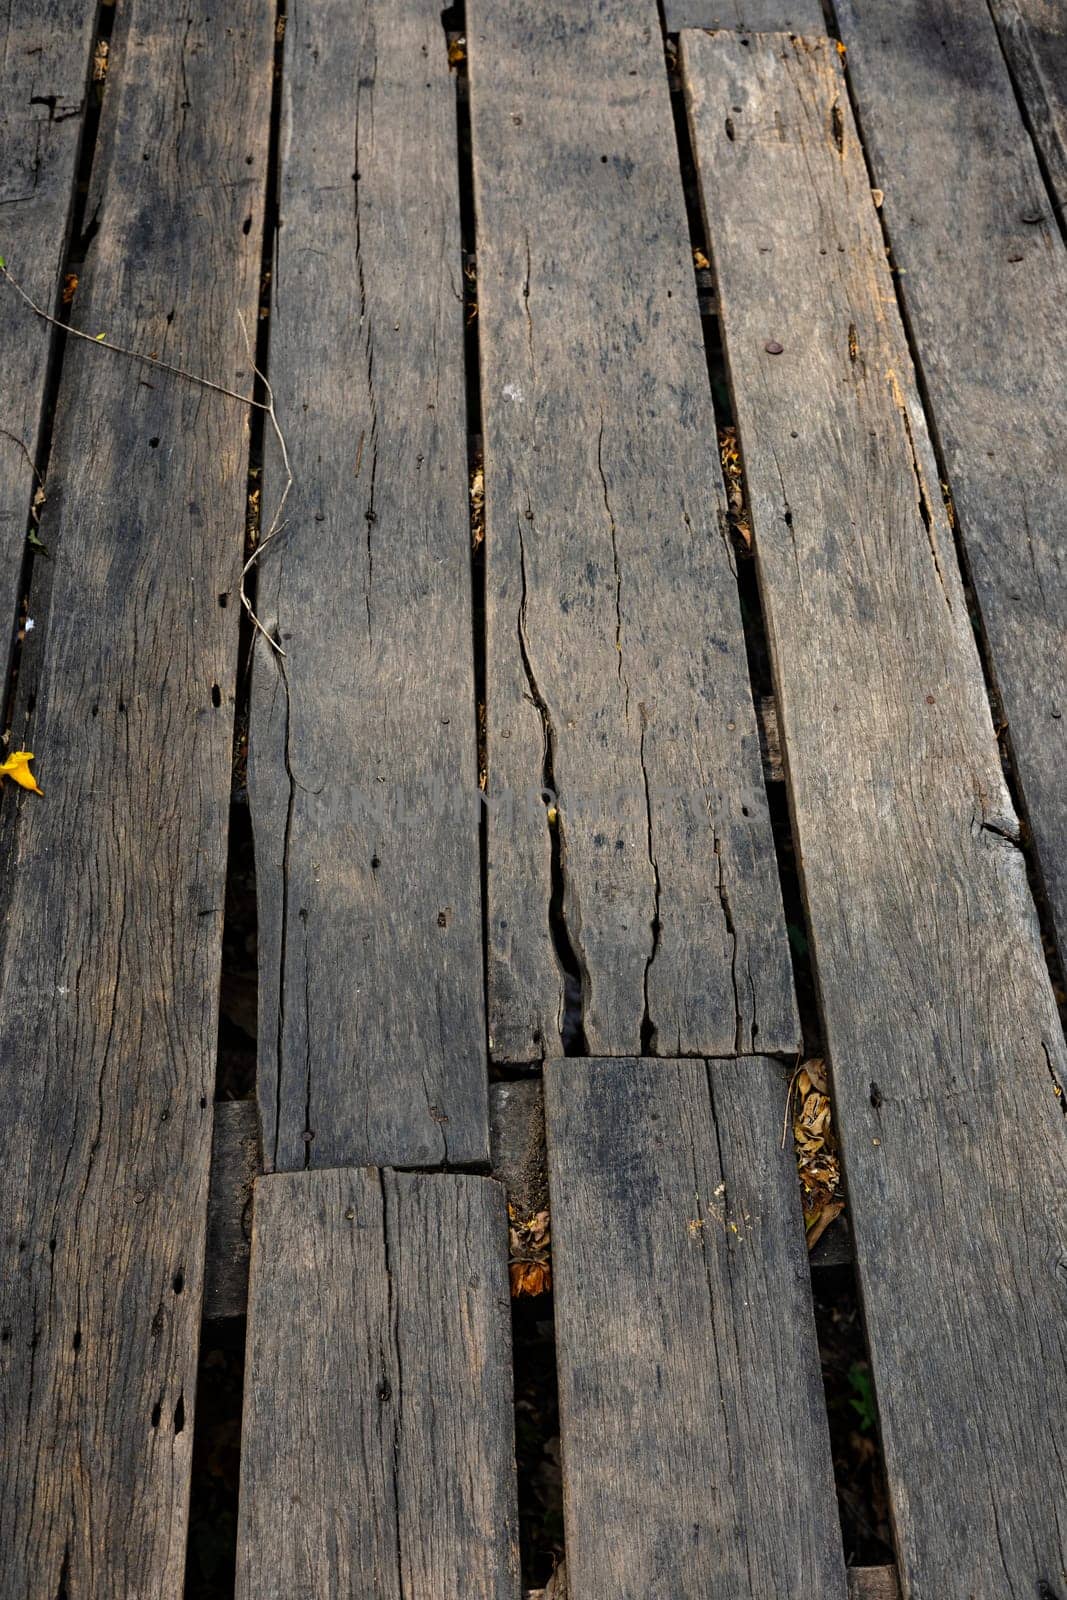 Close up of old abandoned rickety foot bridge. Old wood texture background coming from natural tree. The wooden panel has a beautiful dark pattern.